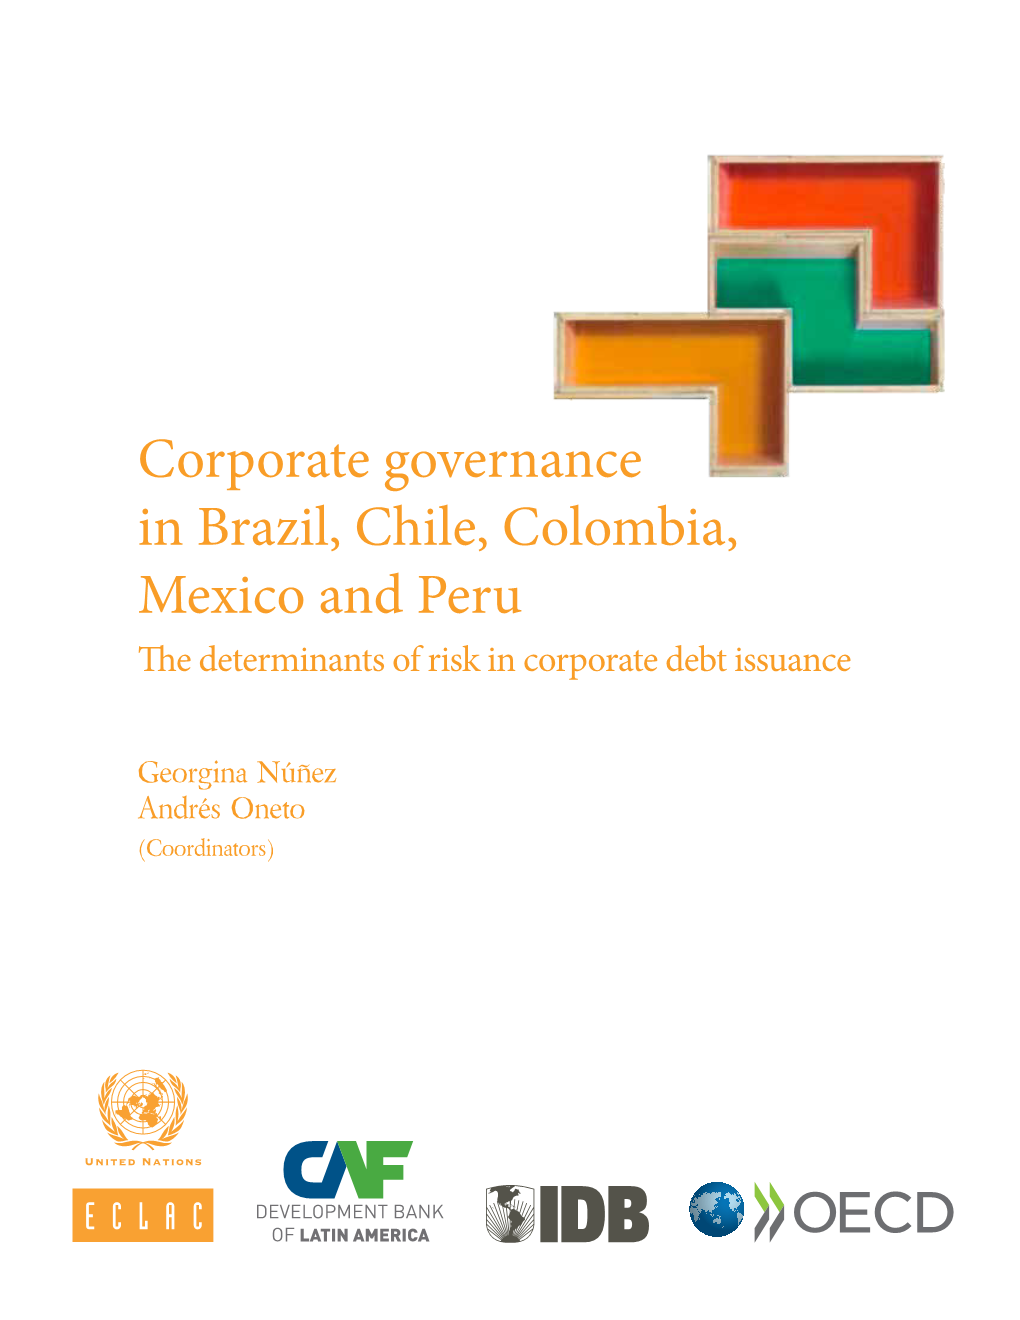 Corporate Governance in Brazil, Chile, Colombia, Mexico and Peru the Determinants of Risk in Corporate Debt Issuance